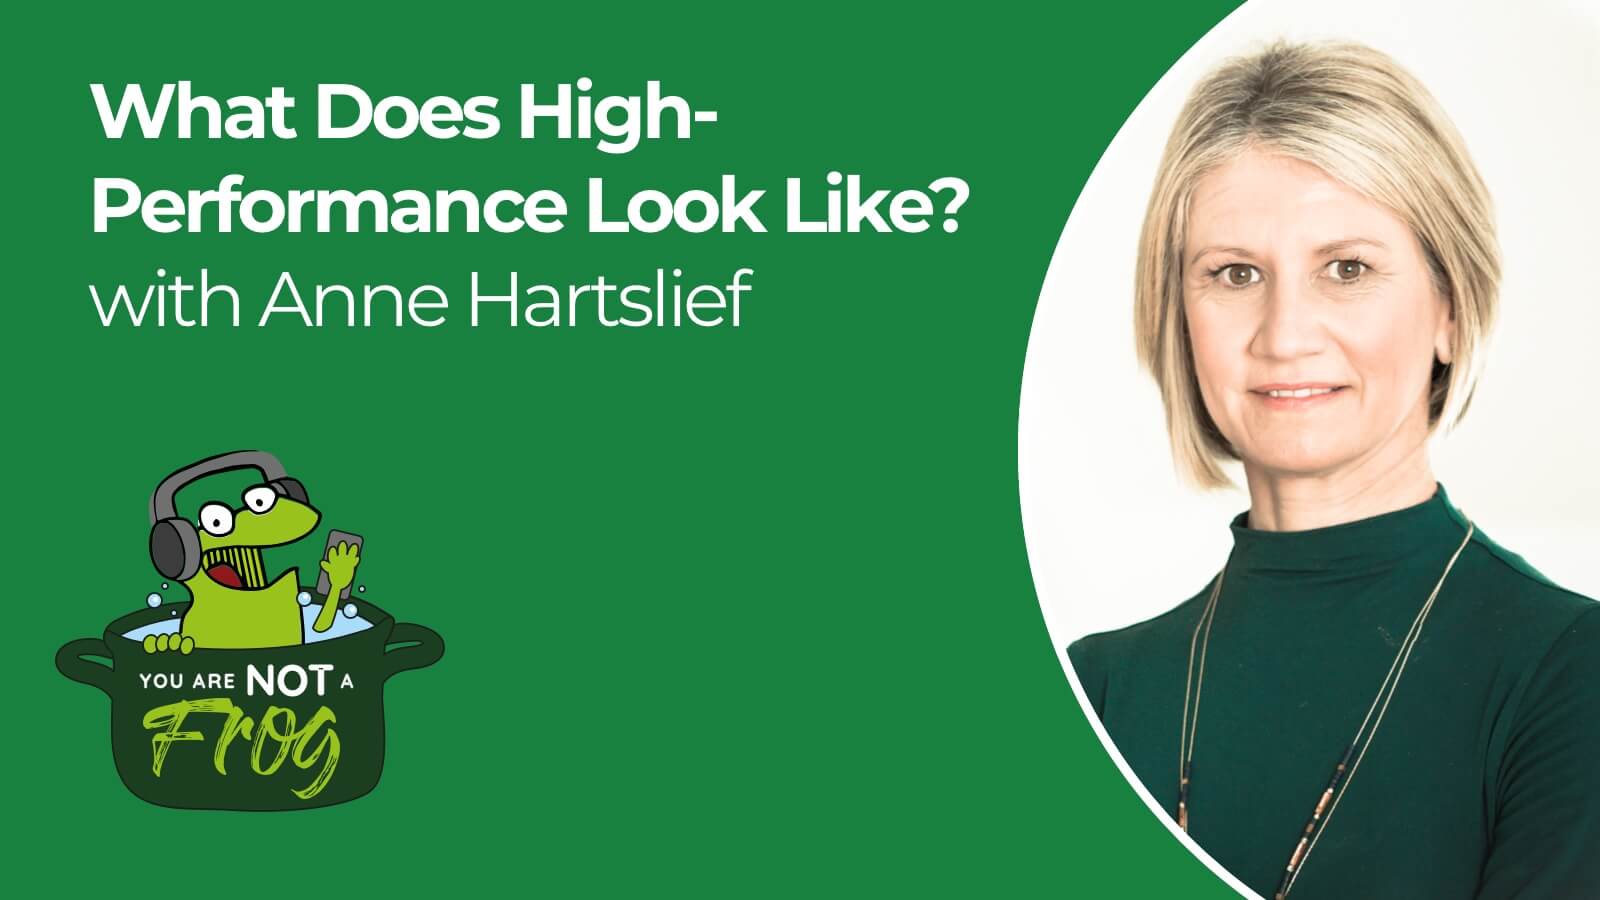 What Does High-Performance Look Like?